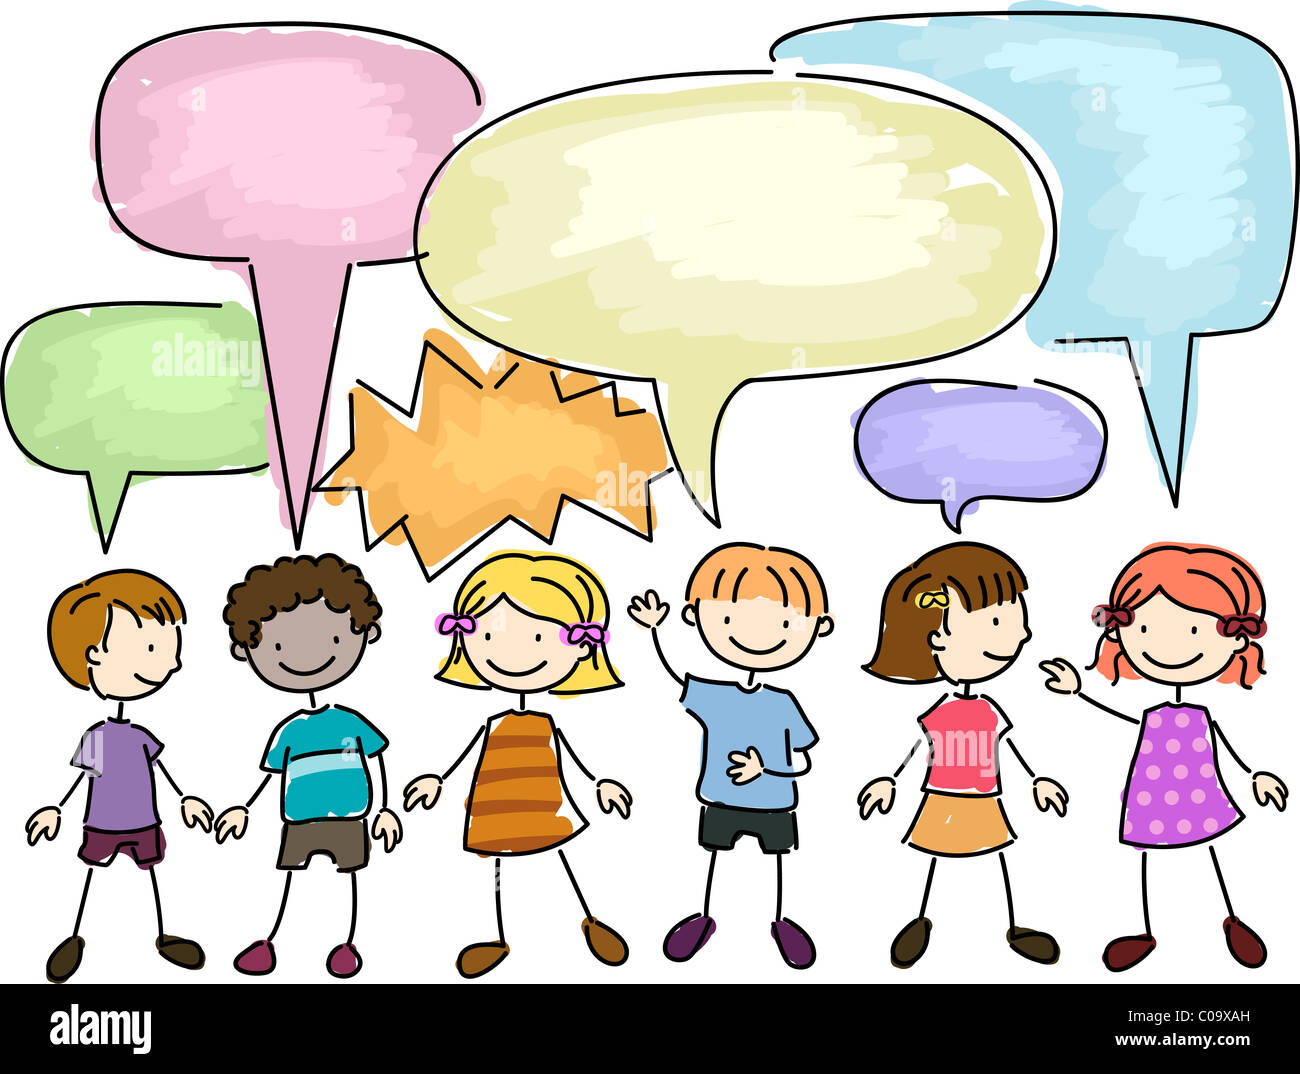 Illustration of a Group of Kids Talking Stock Photo